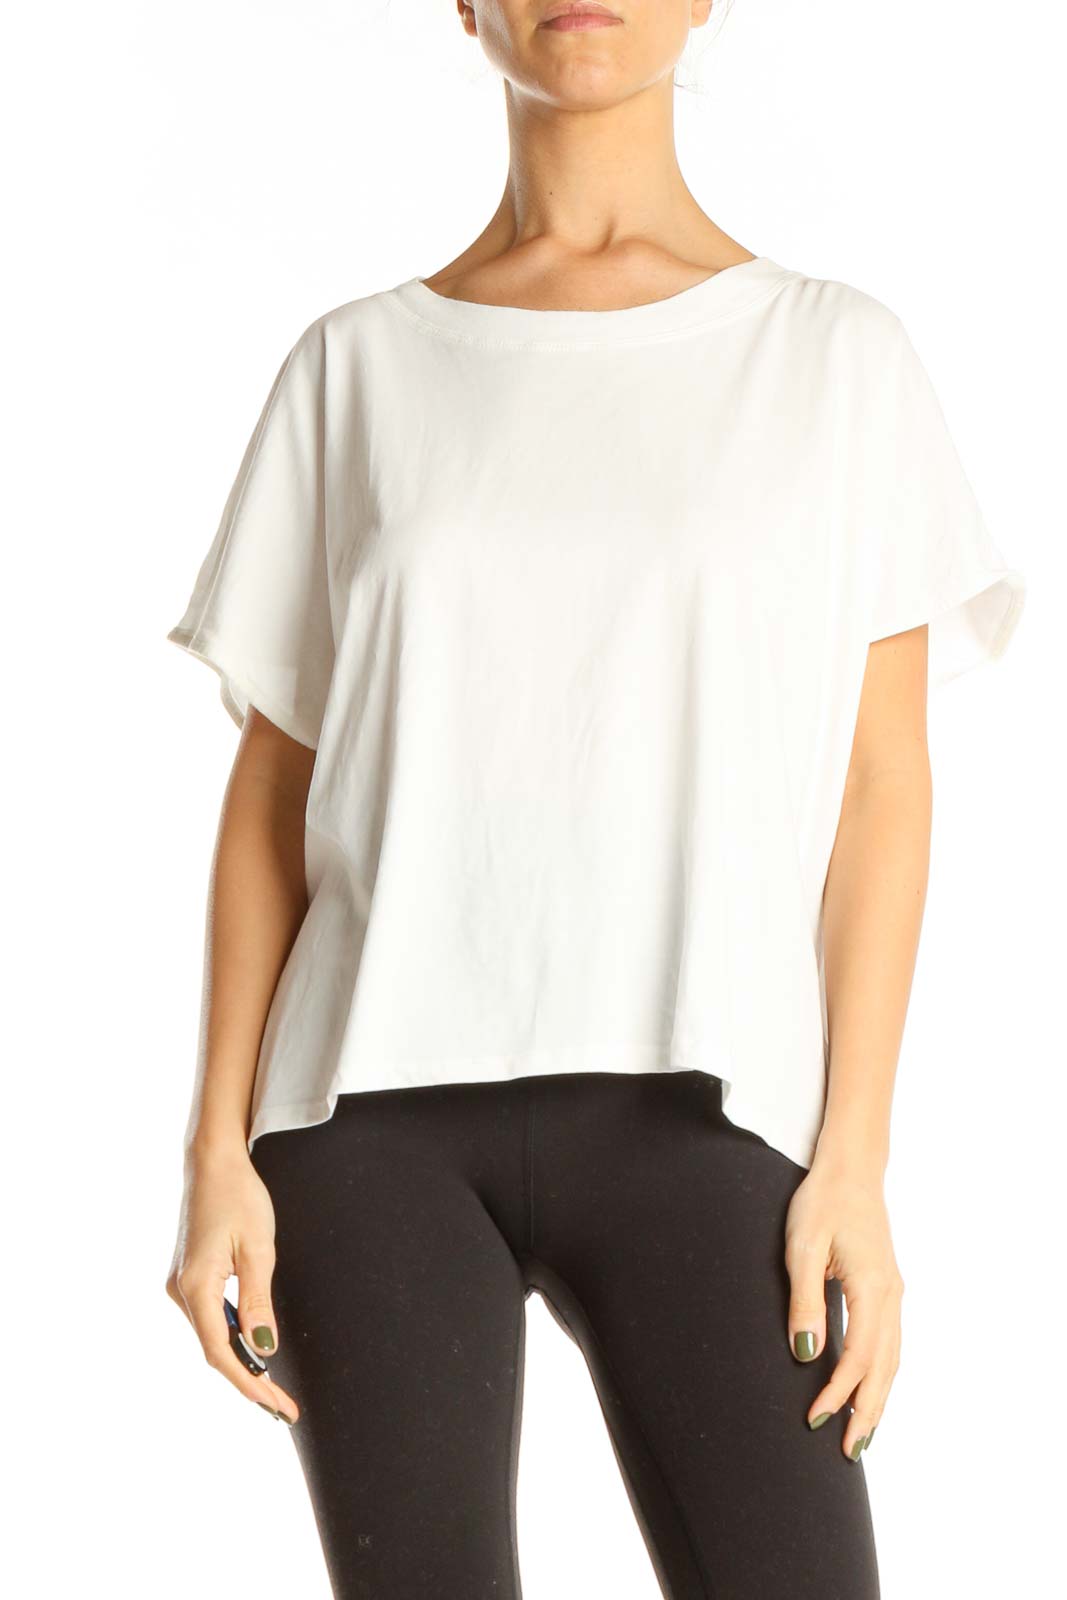 White All Day Wear Top Front